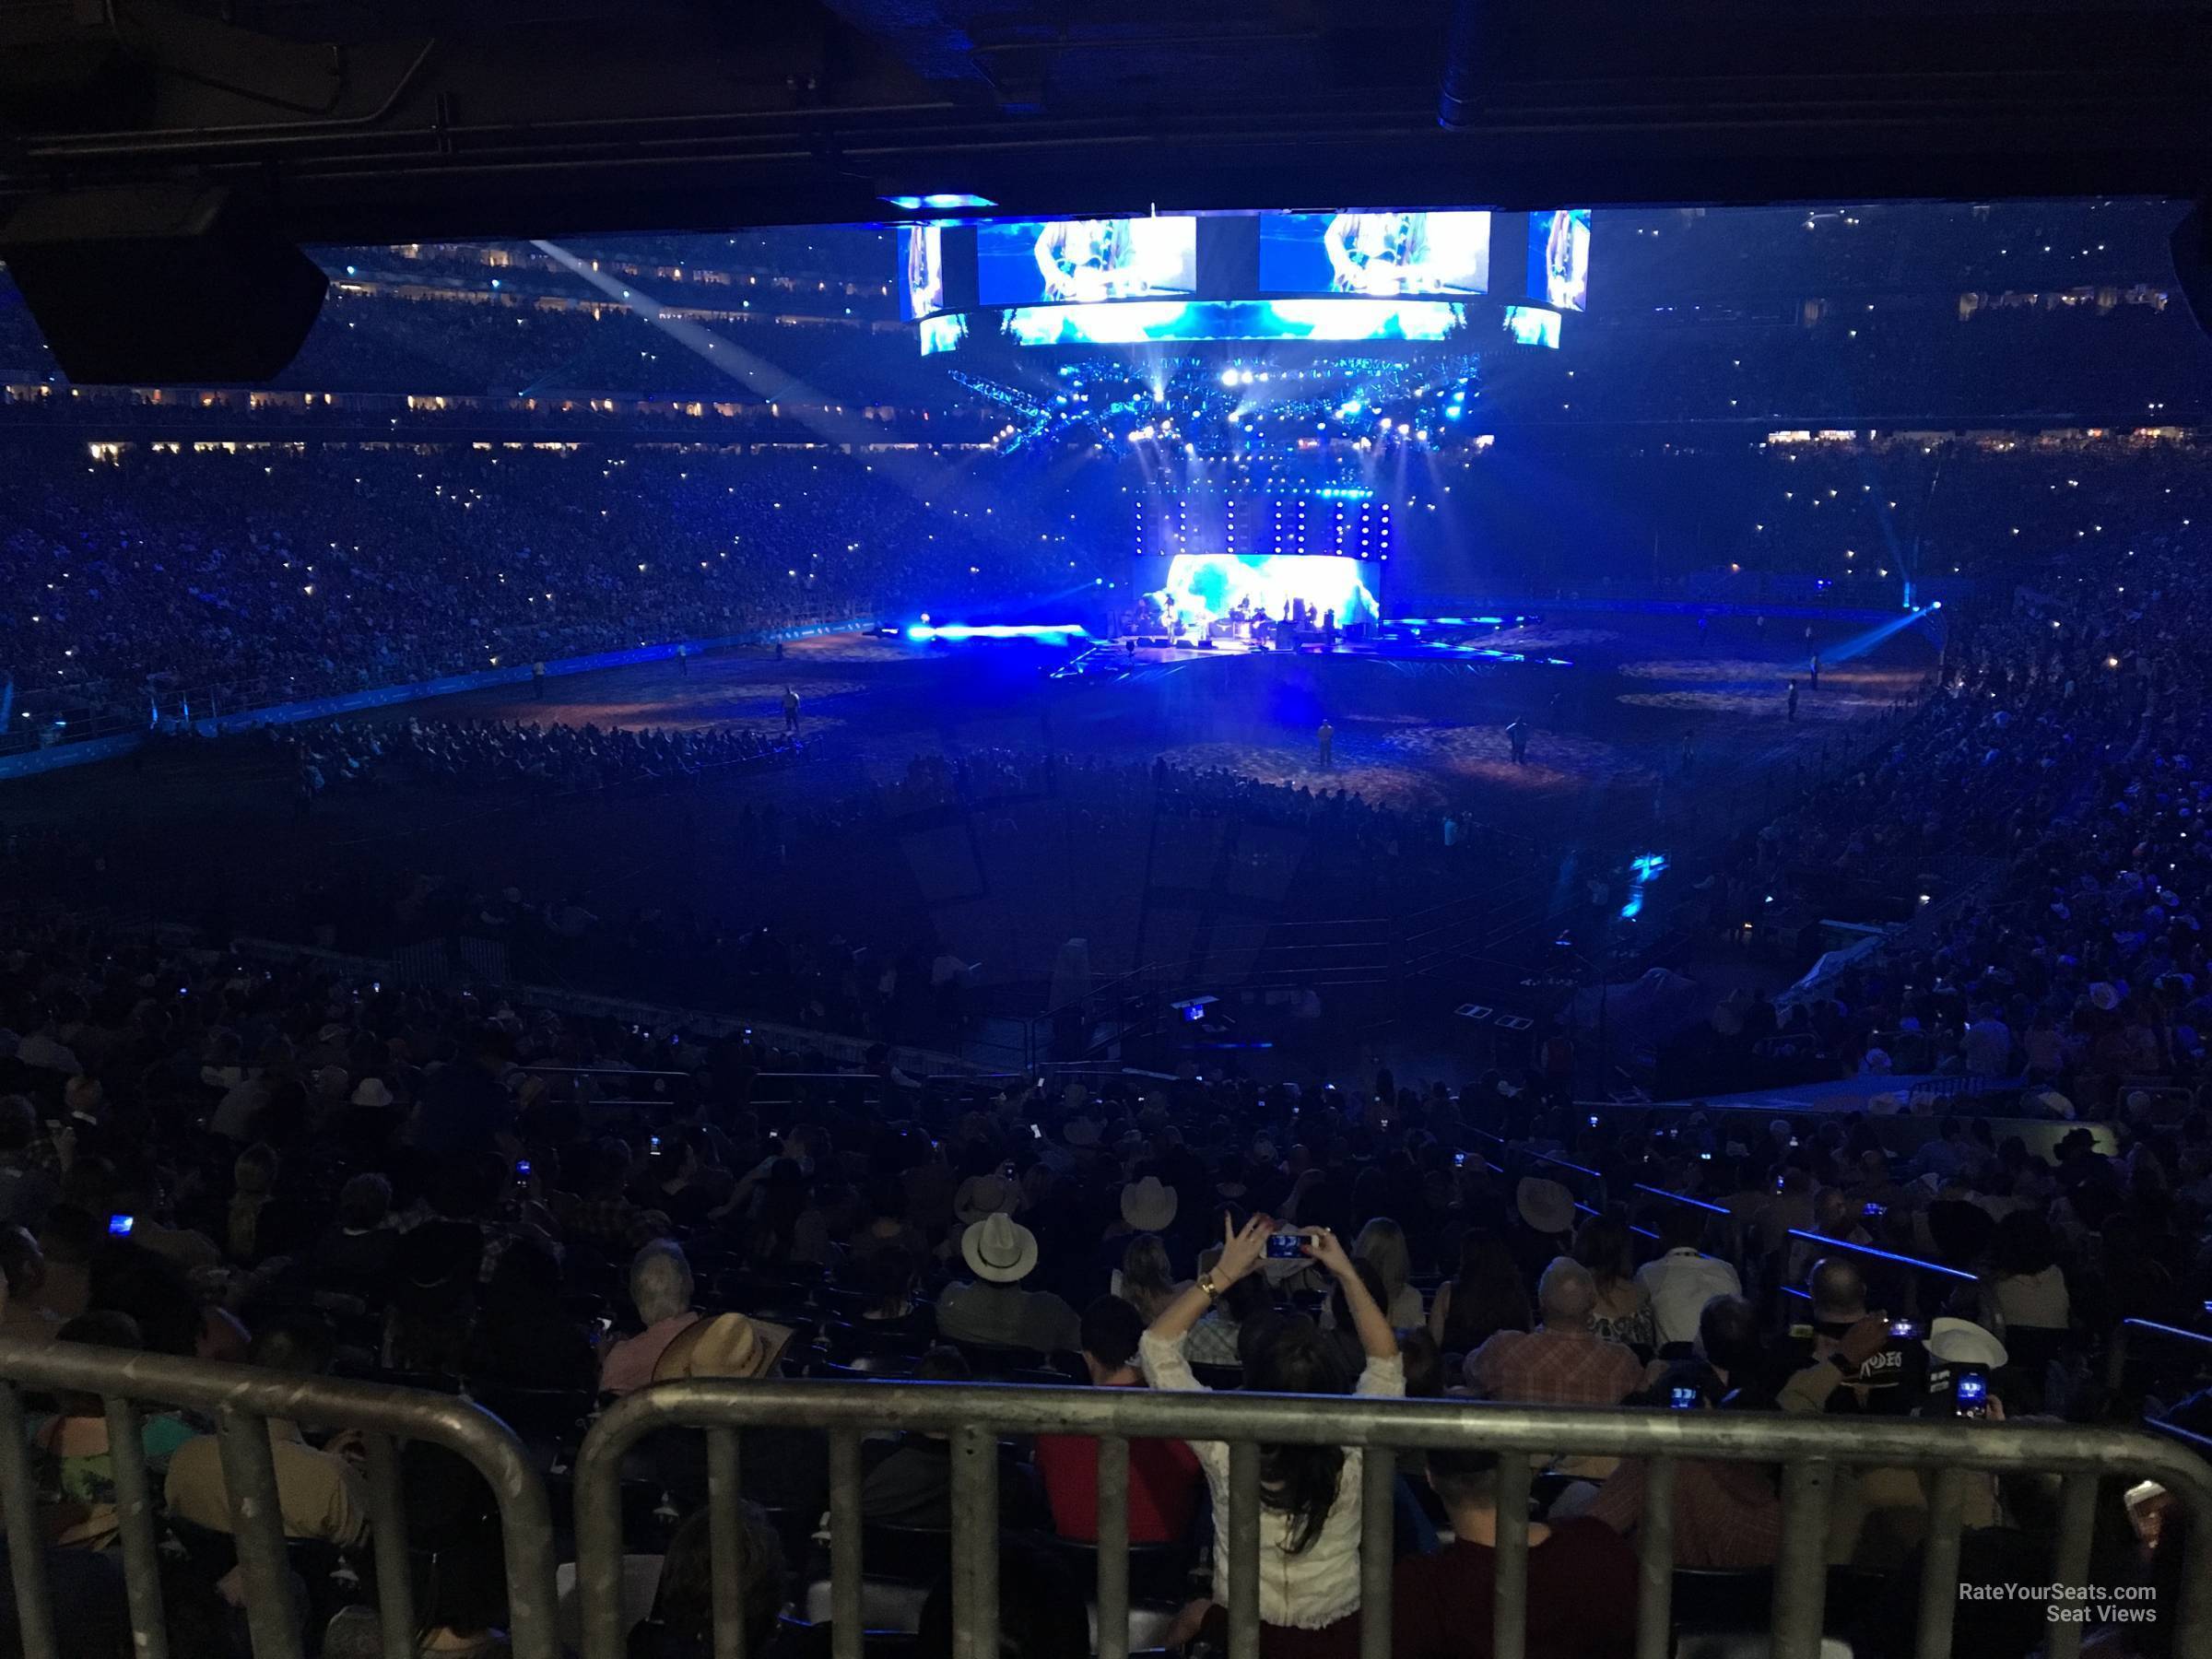 section 114, row hh seat view  for concert - nrg stadium